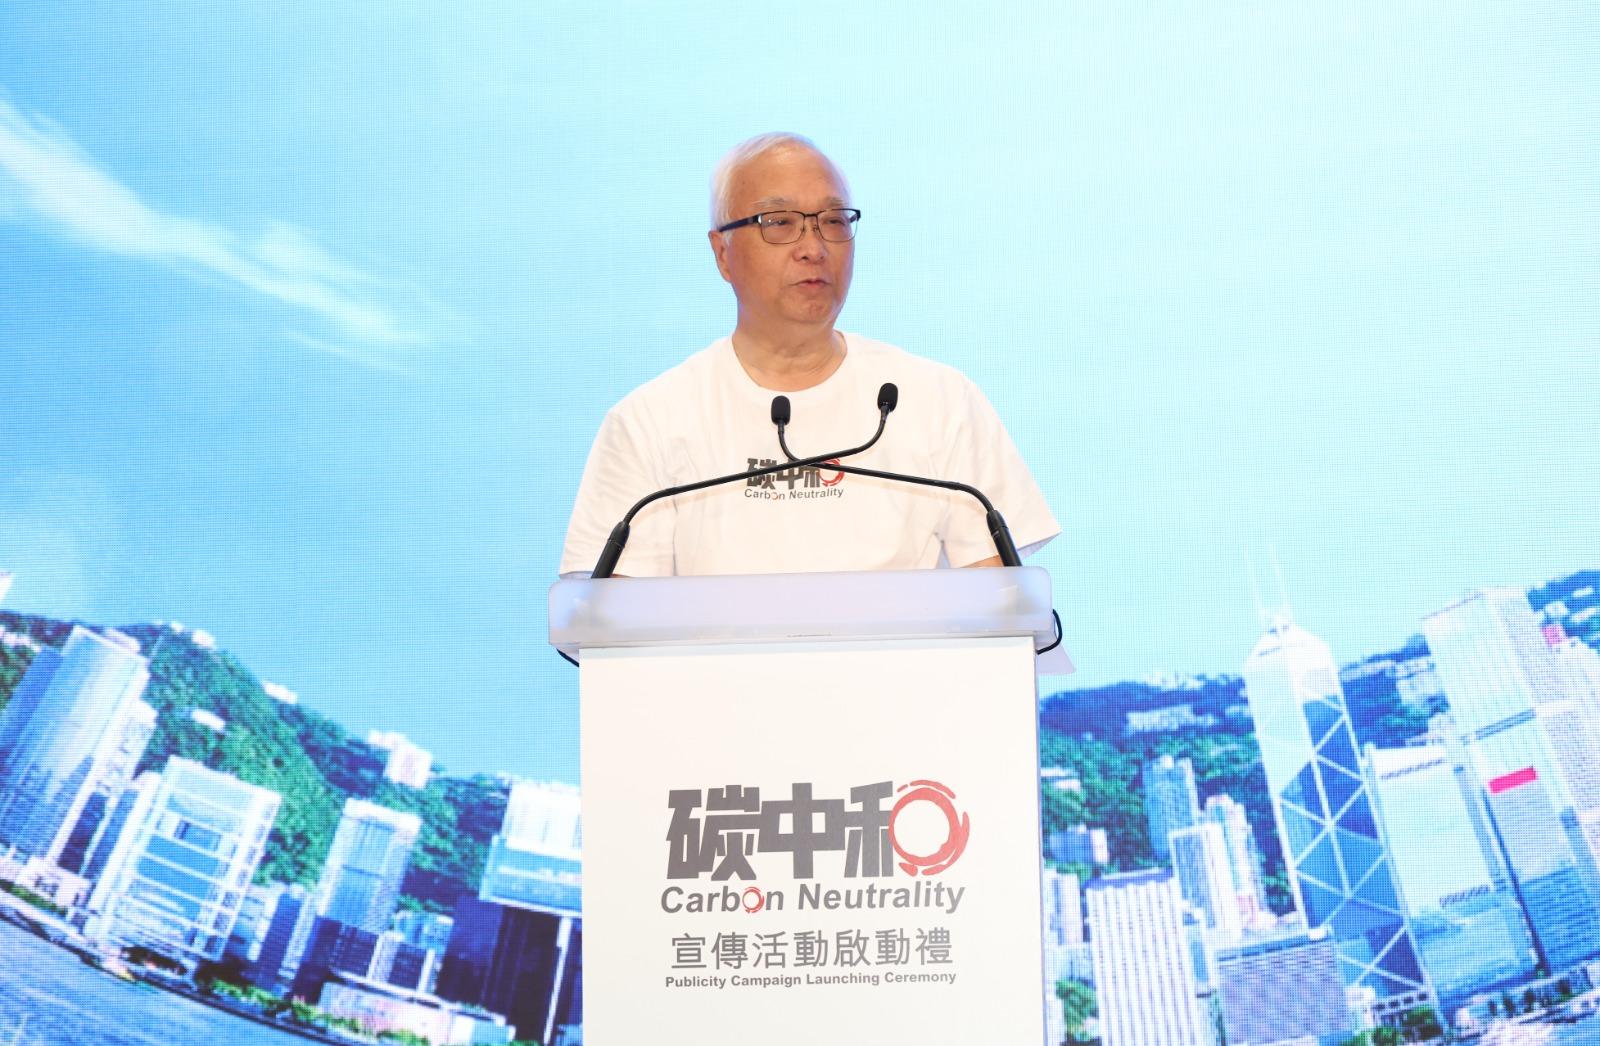 The Environmental Campaign Committee today (August 4) officially launched the Carbon Neutrality Publicity Campaign. Photo shows the Secretary for Environment and Ecology, Mr Tse Chin-wan, delivering his speech at the launch ceremony at the City Gallery in Central.